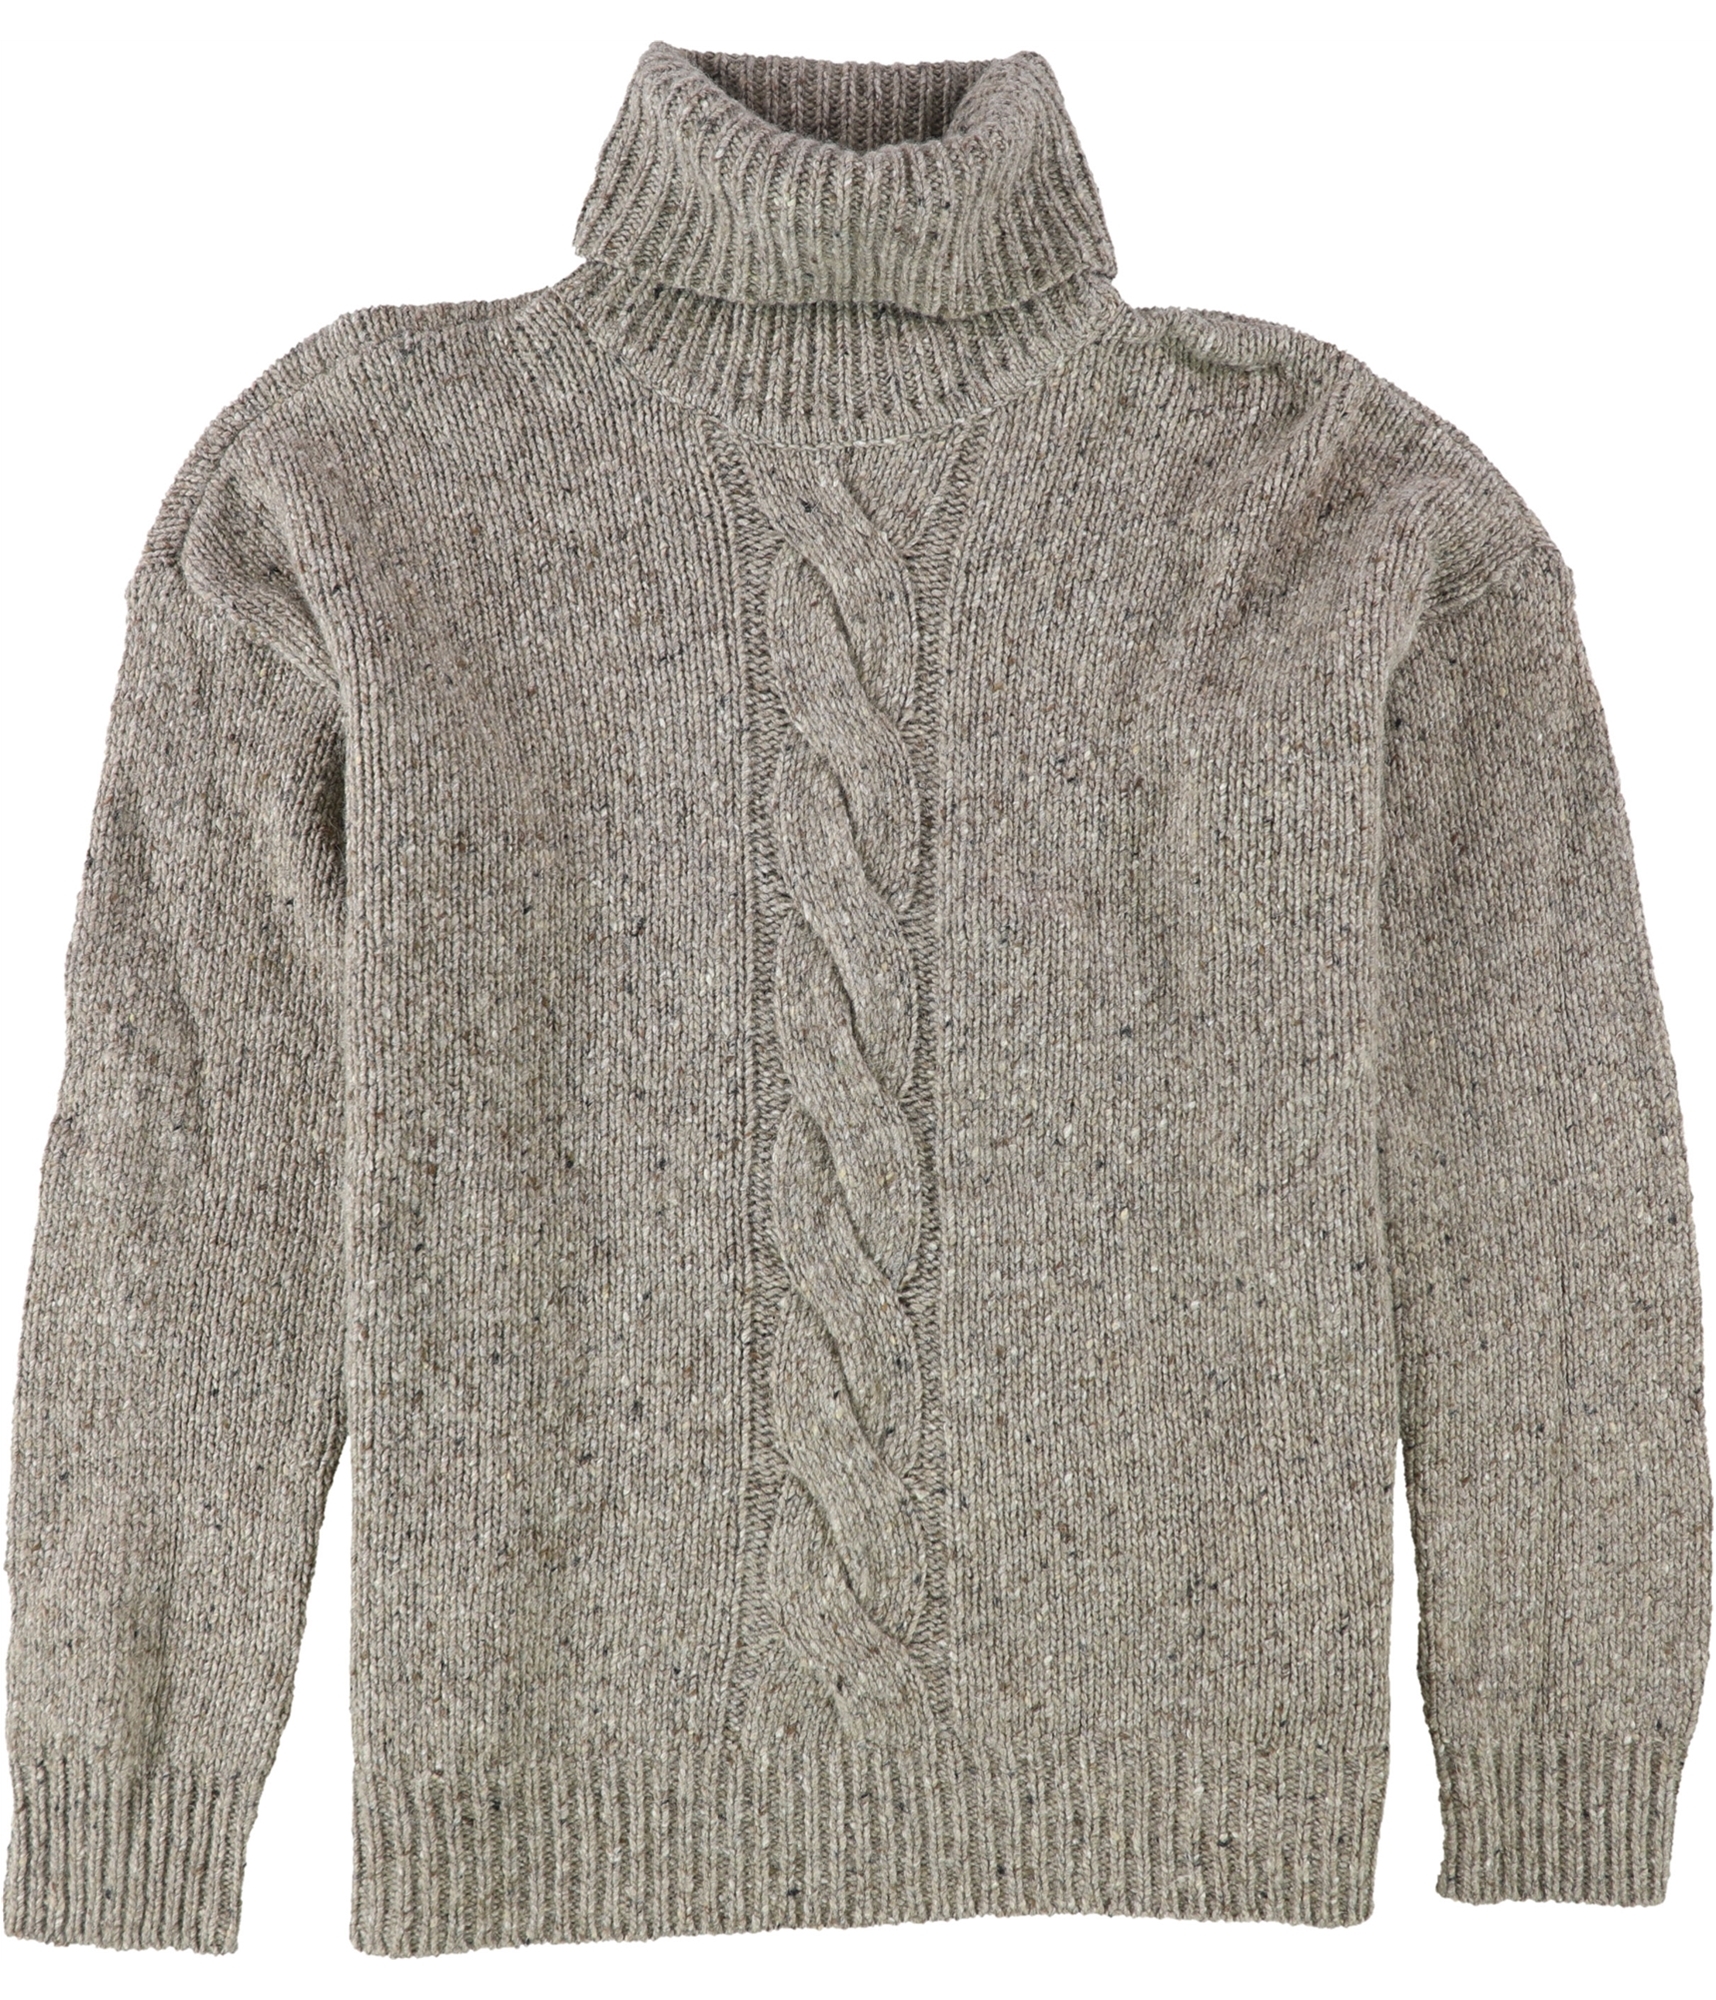 Ralph Lauren Womens Cable Knit Sweater, Gray